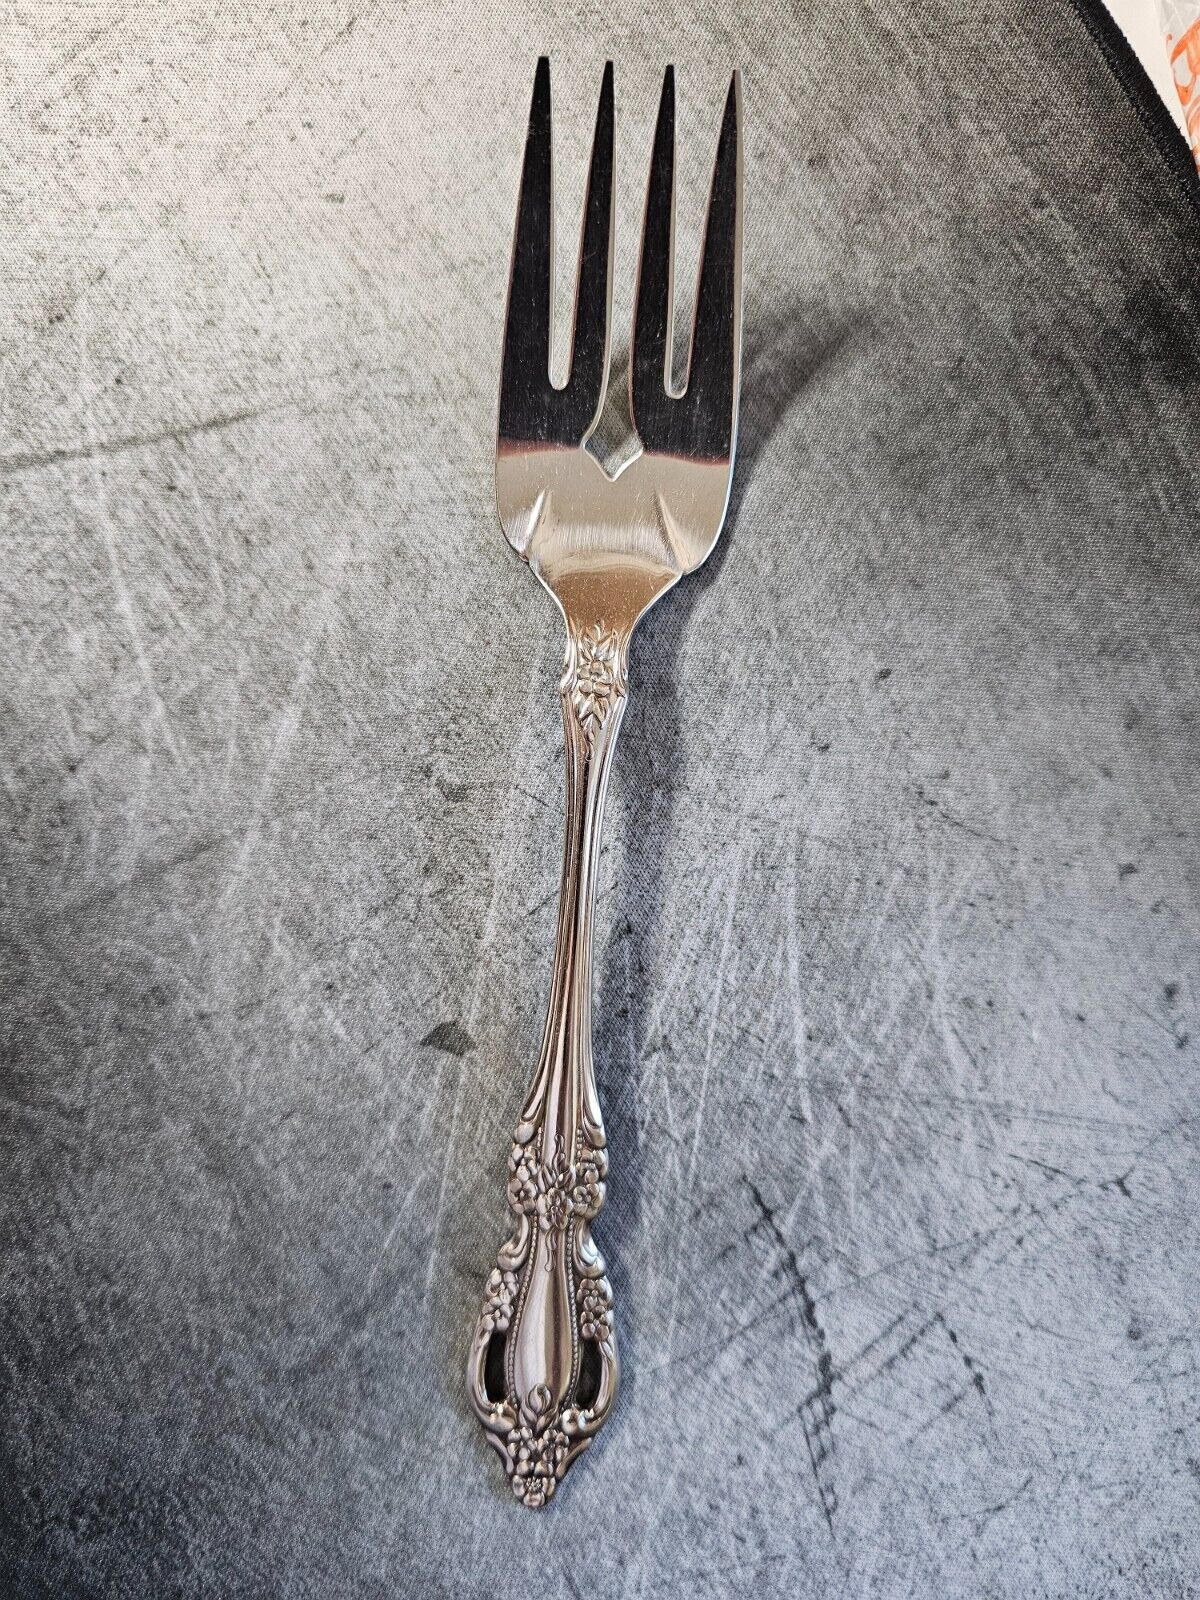 Primary image for Oneida BRAHMS Cold Meat Fork 8 1/2" Community Stainless Flatware Silverware